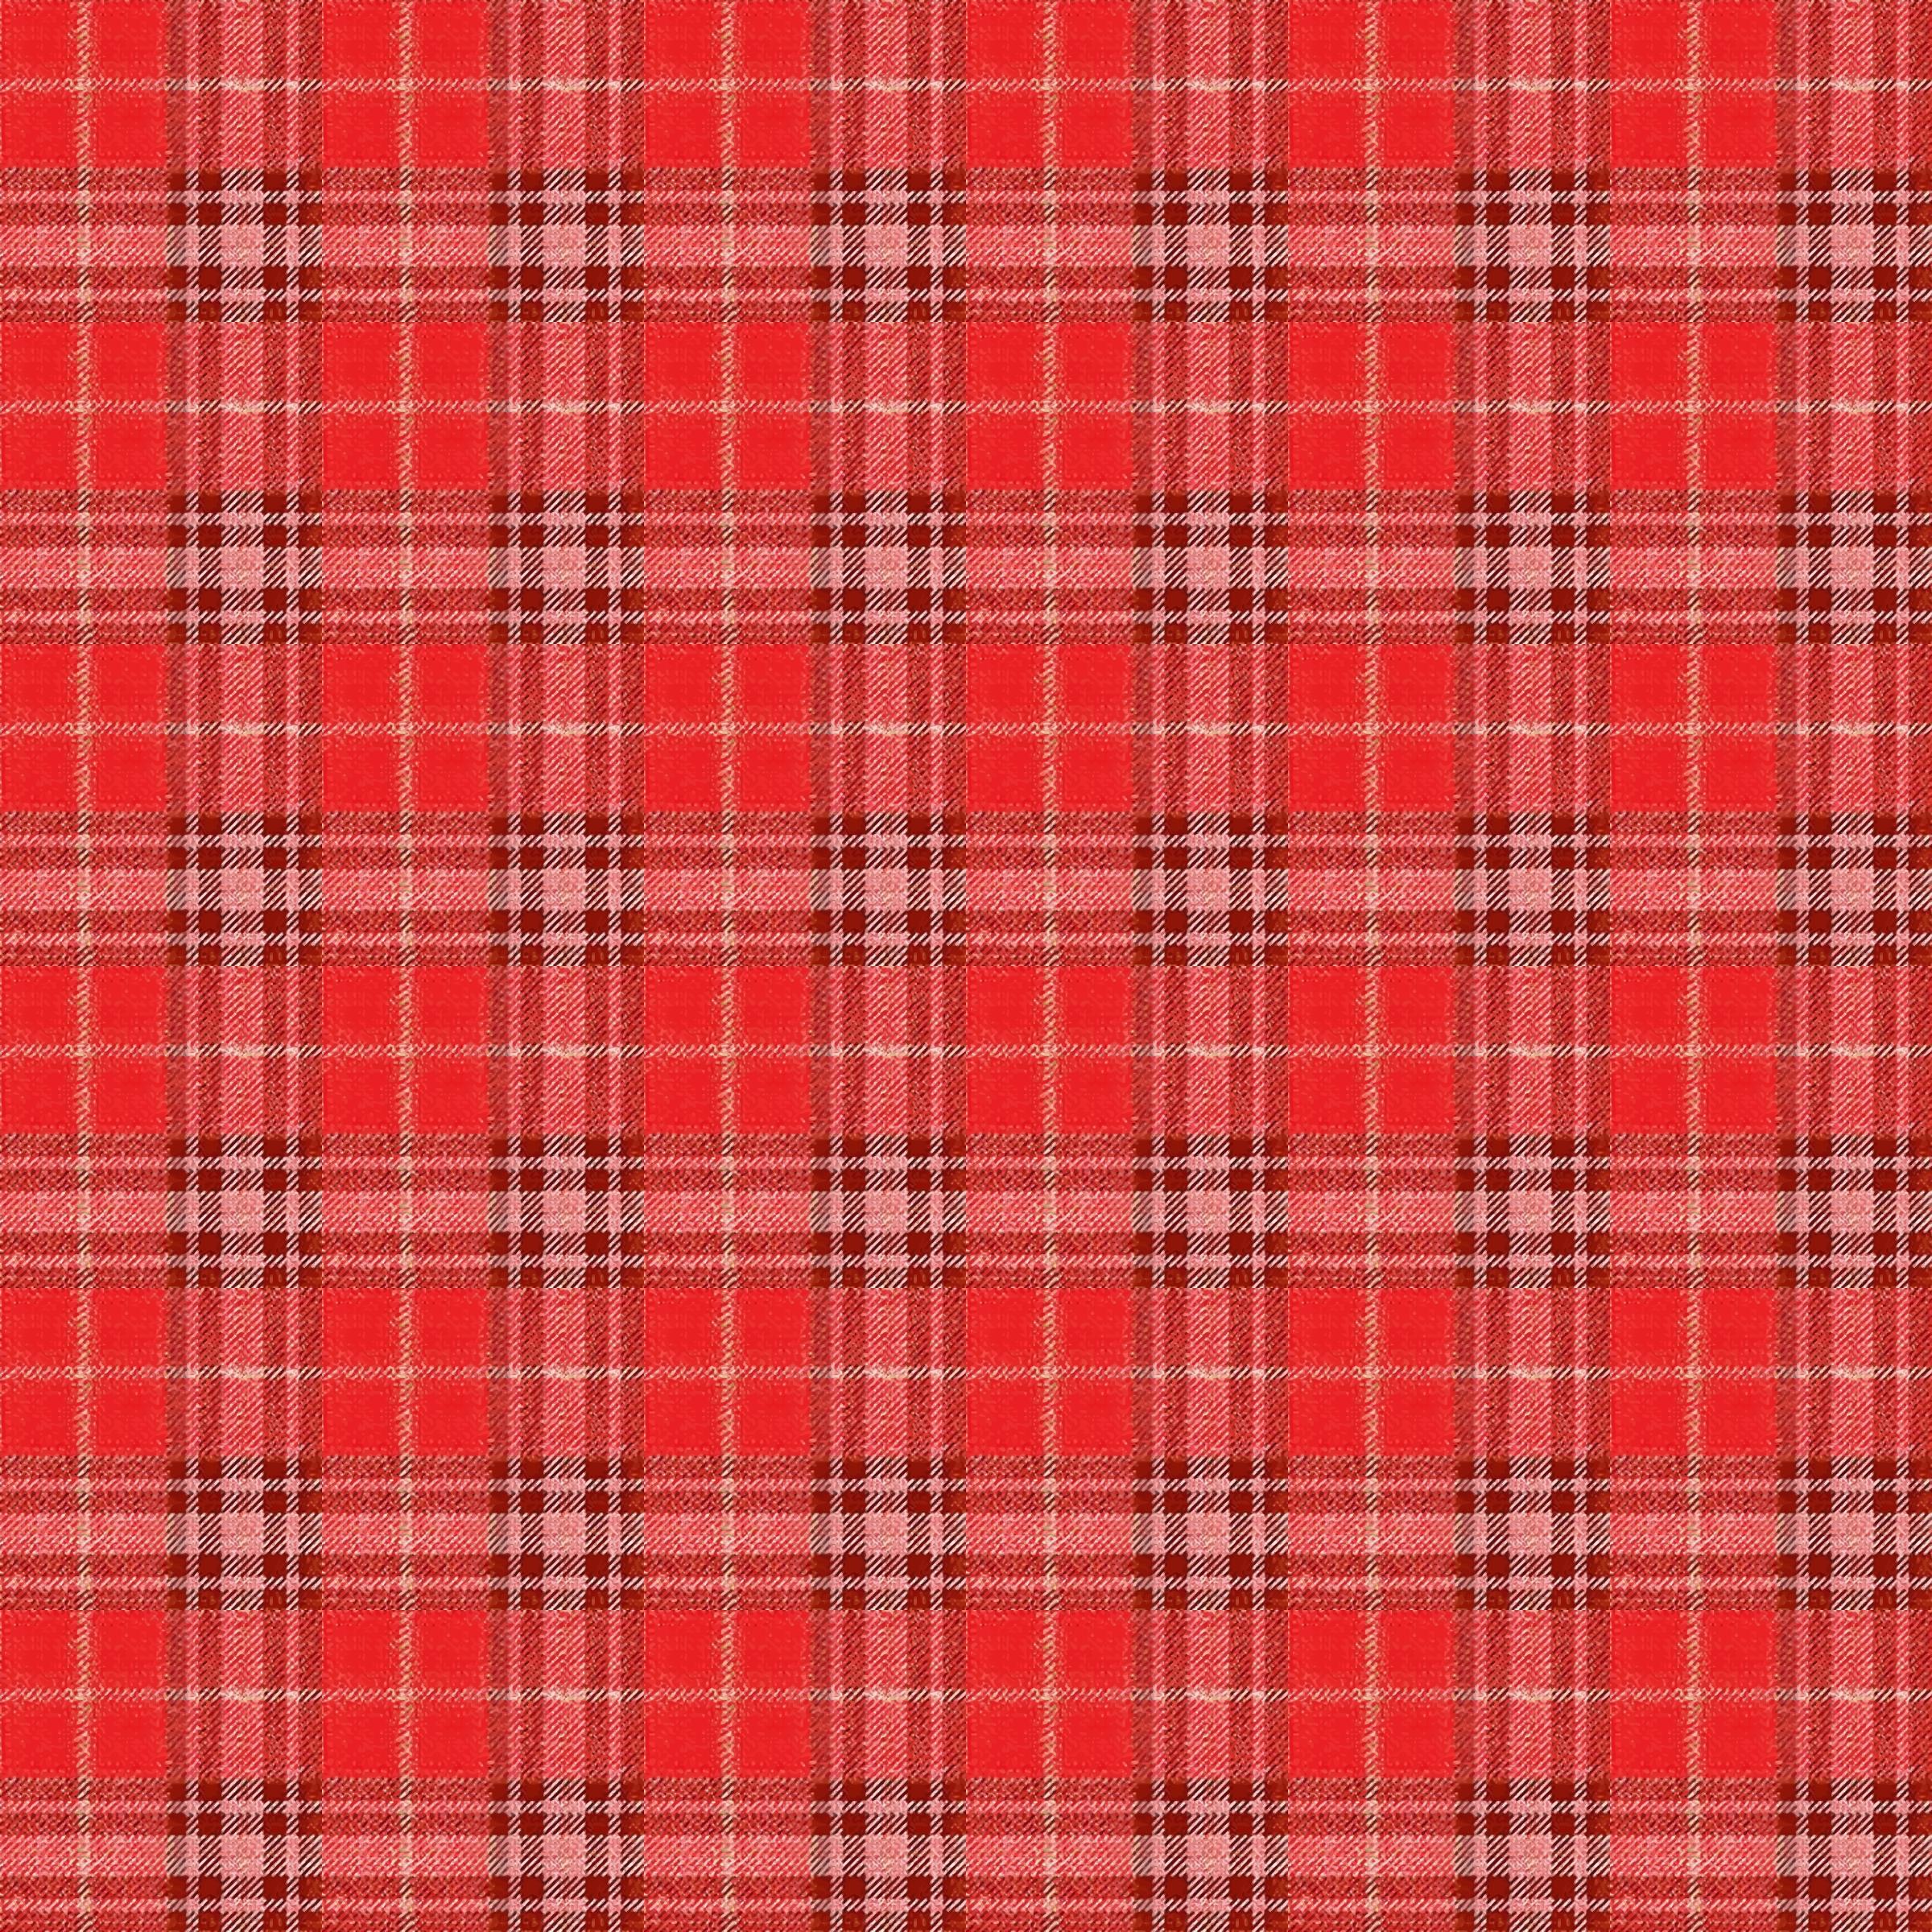 Chequered tablecloth 2 png